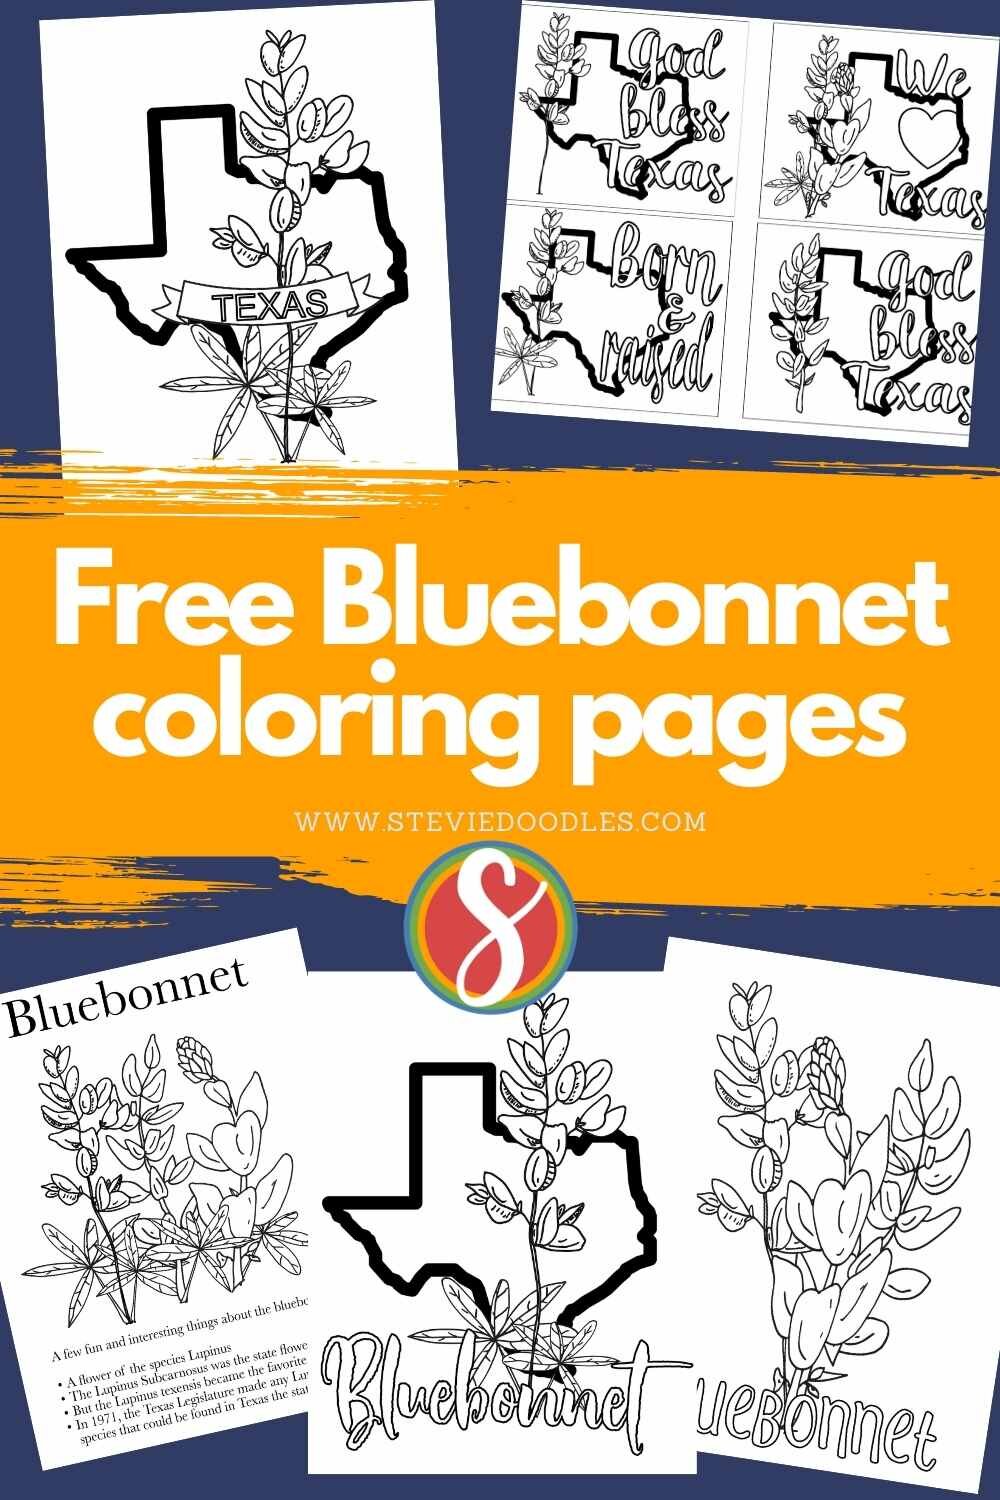 5 free bluebonnet coloring pages from Stevie Doodles - easily print and color these pages today